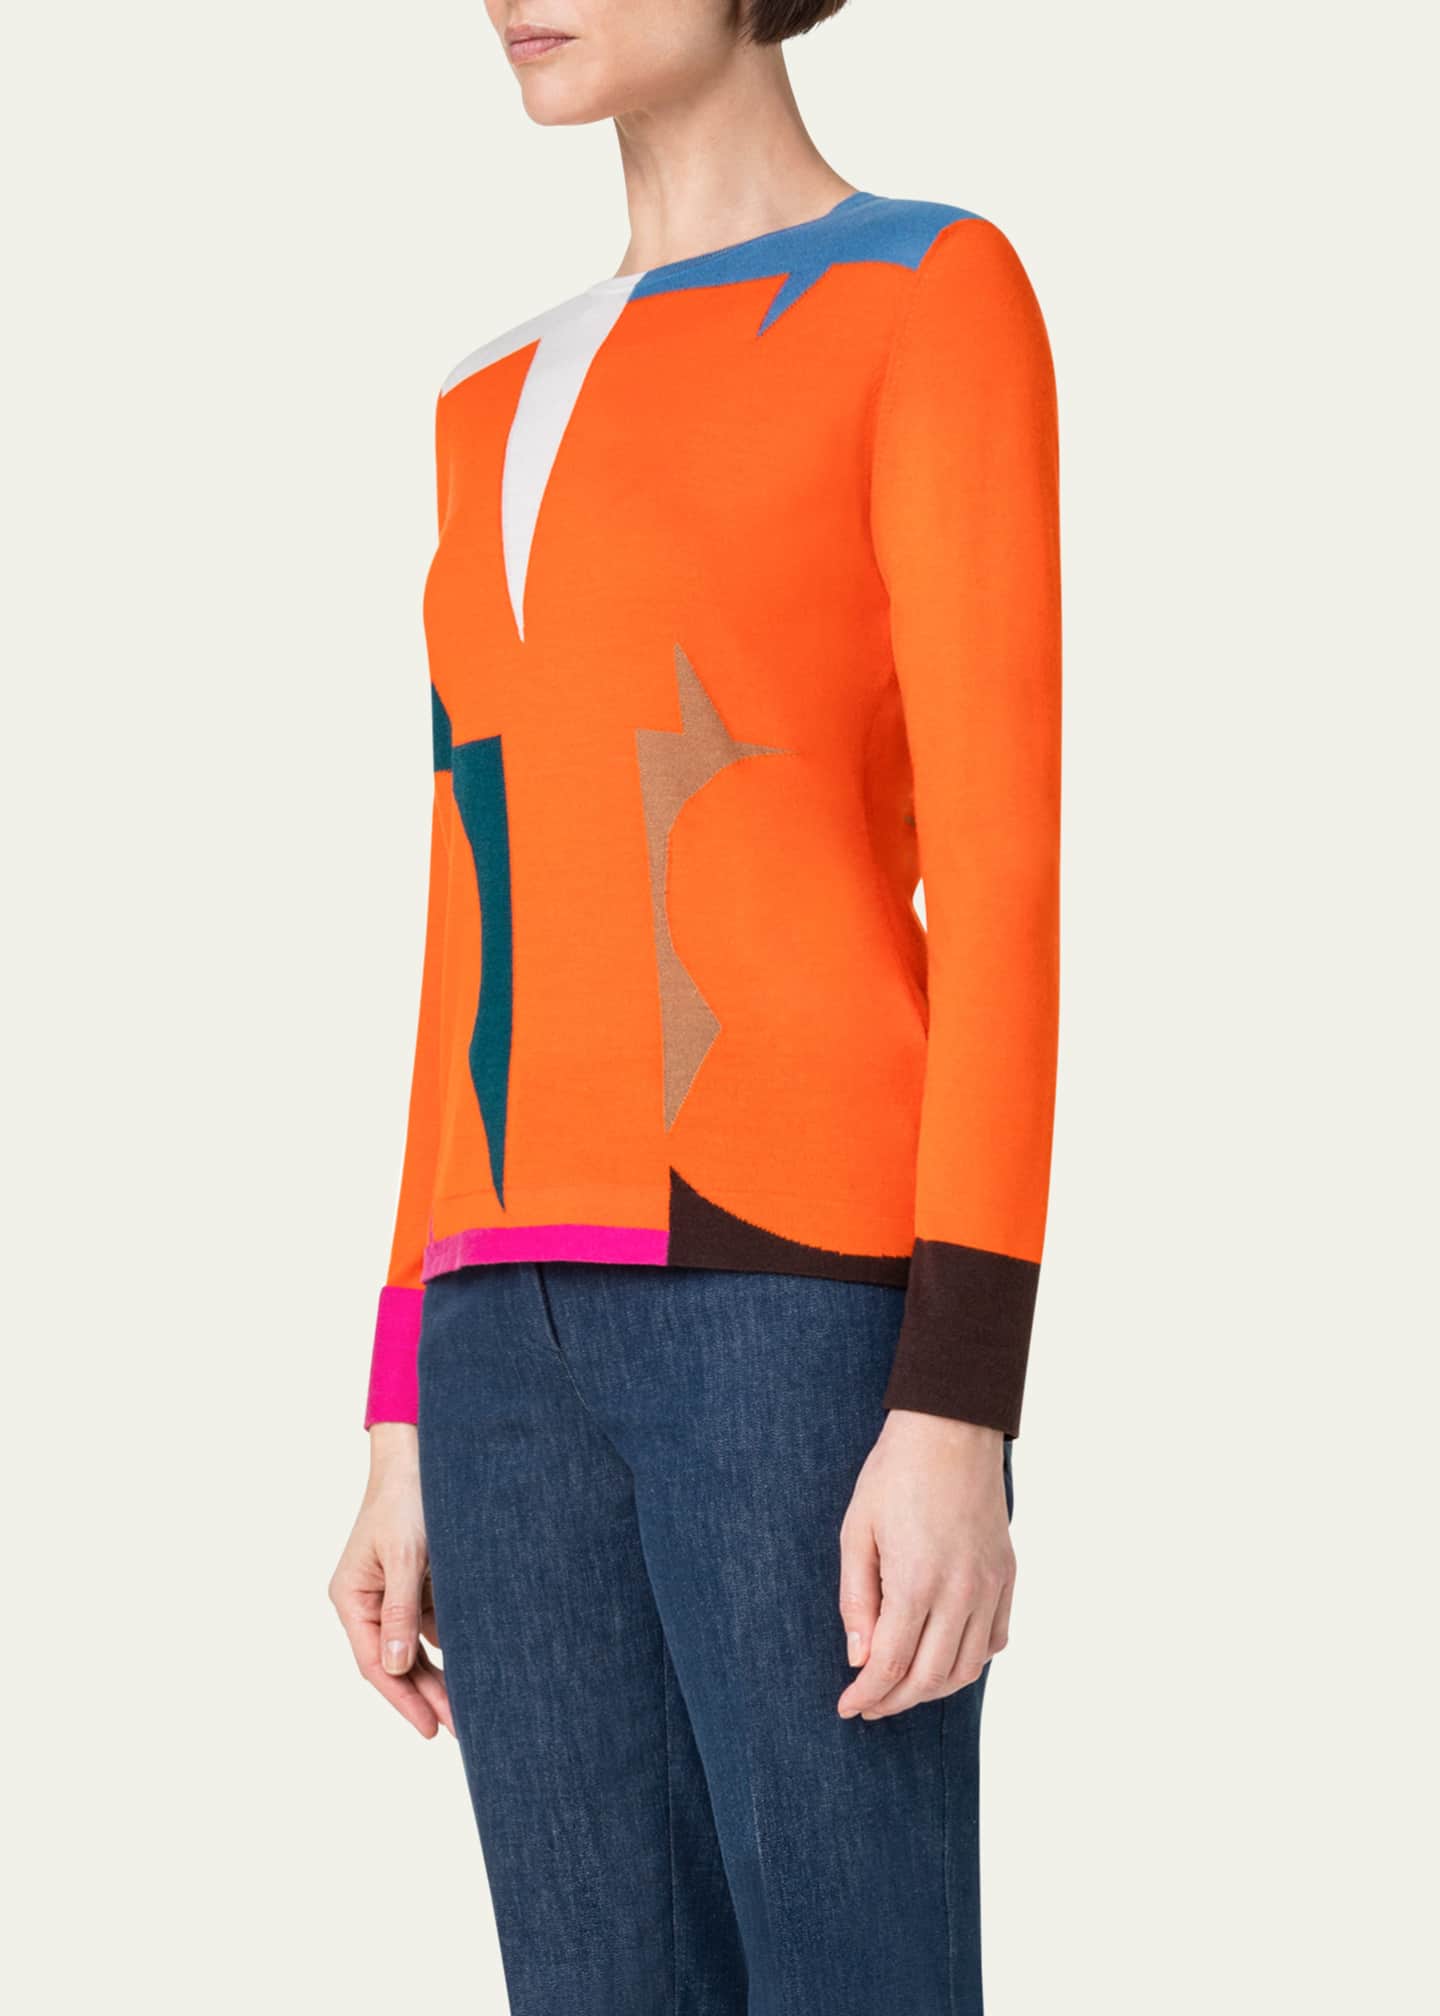 Akris Wool-Blend Knit Sweater with Colorblock Intarsia Detail